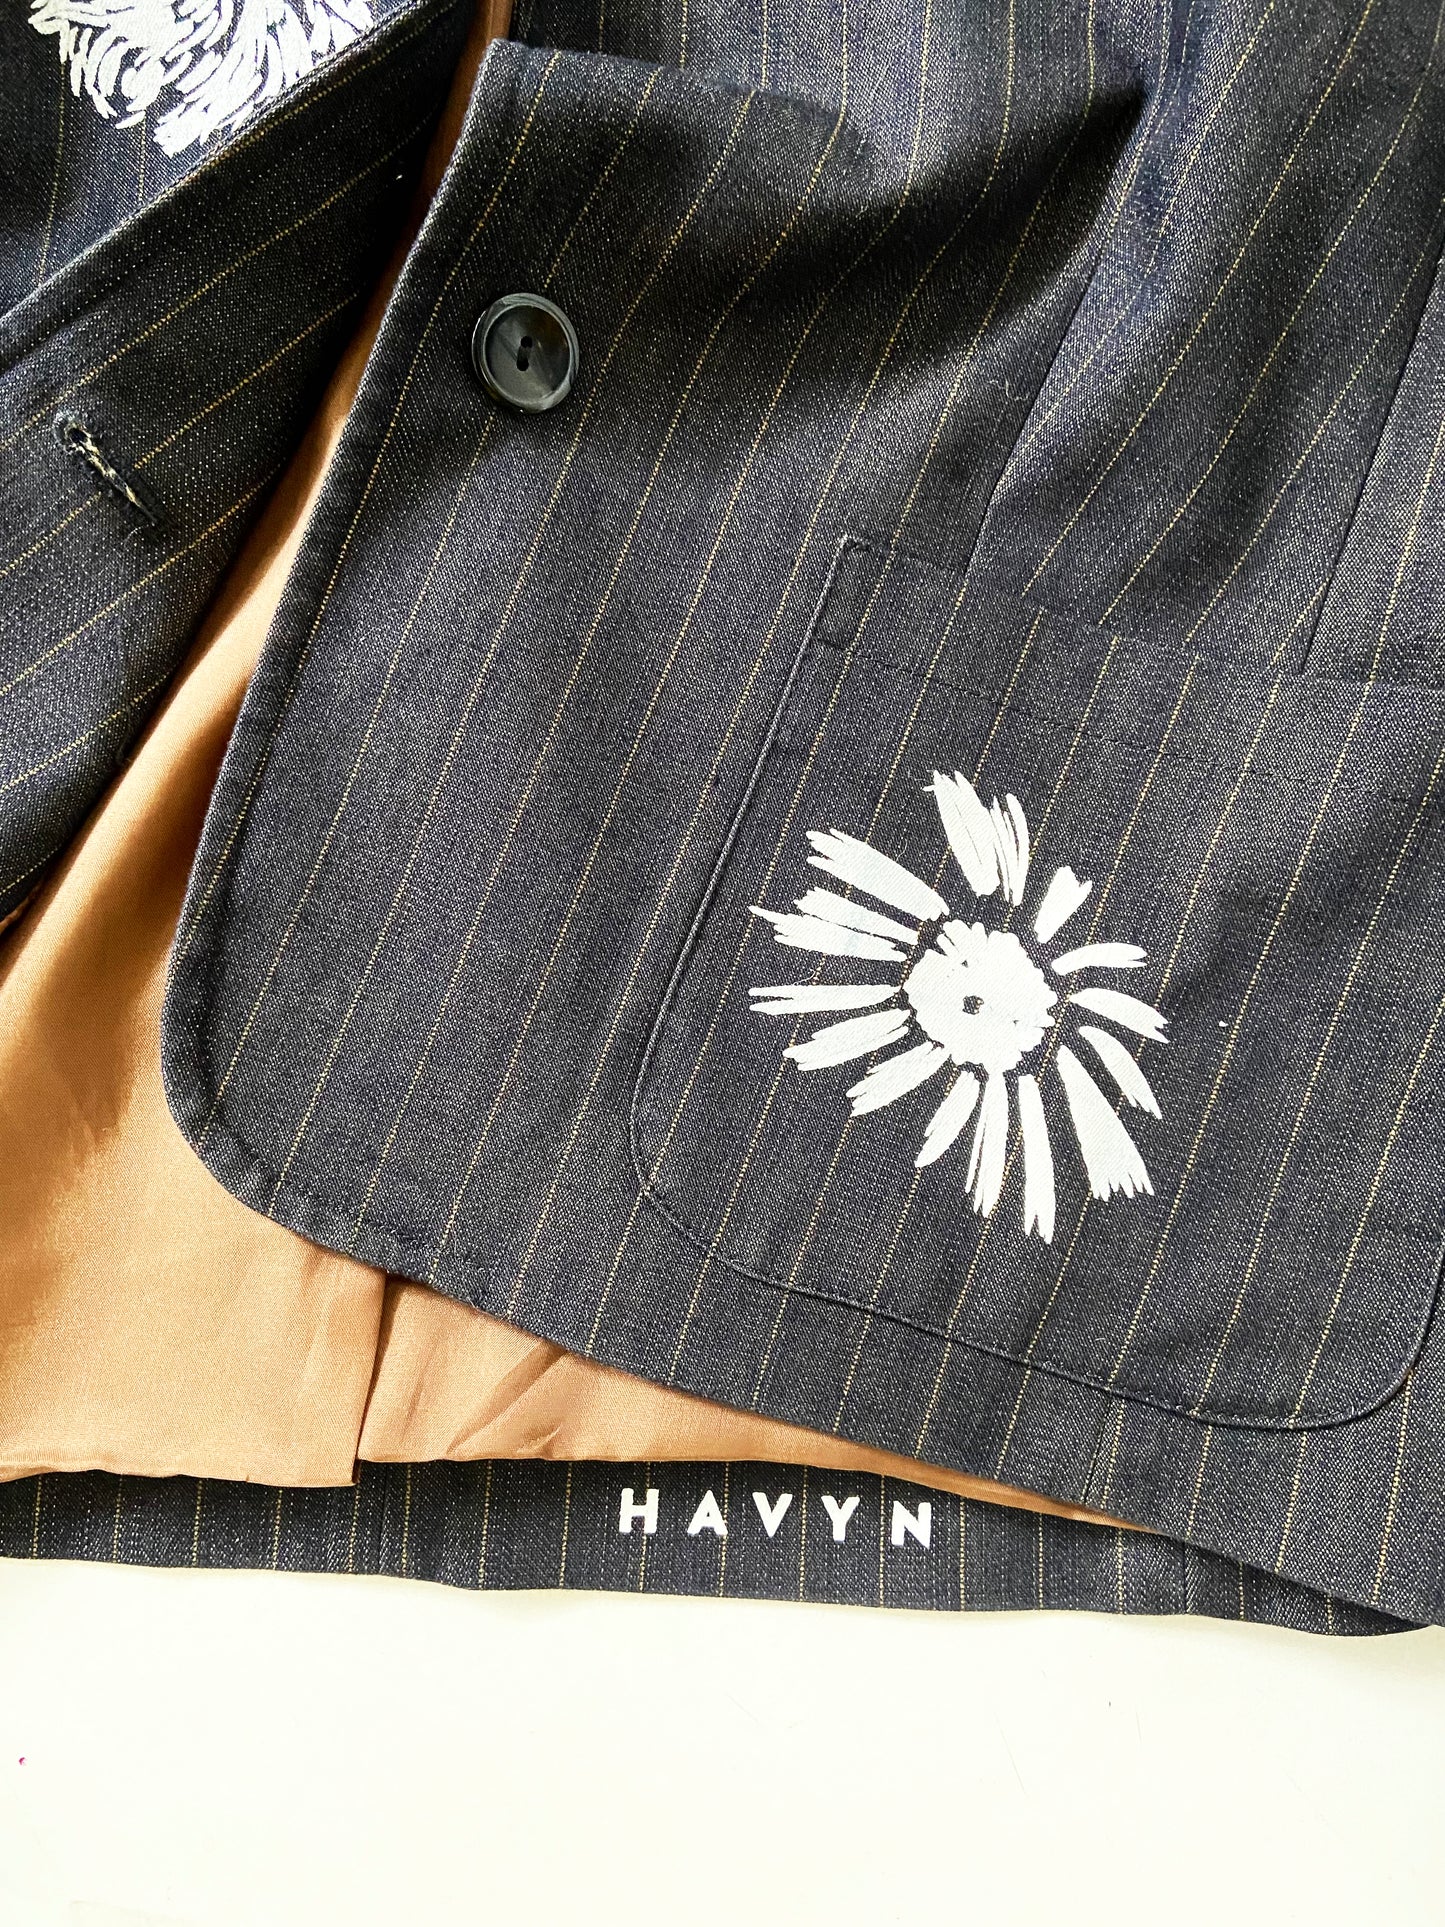 One of a Kind Hand Printed Flowers on Striped Blazer